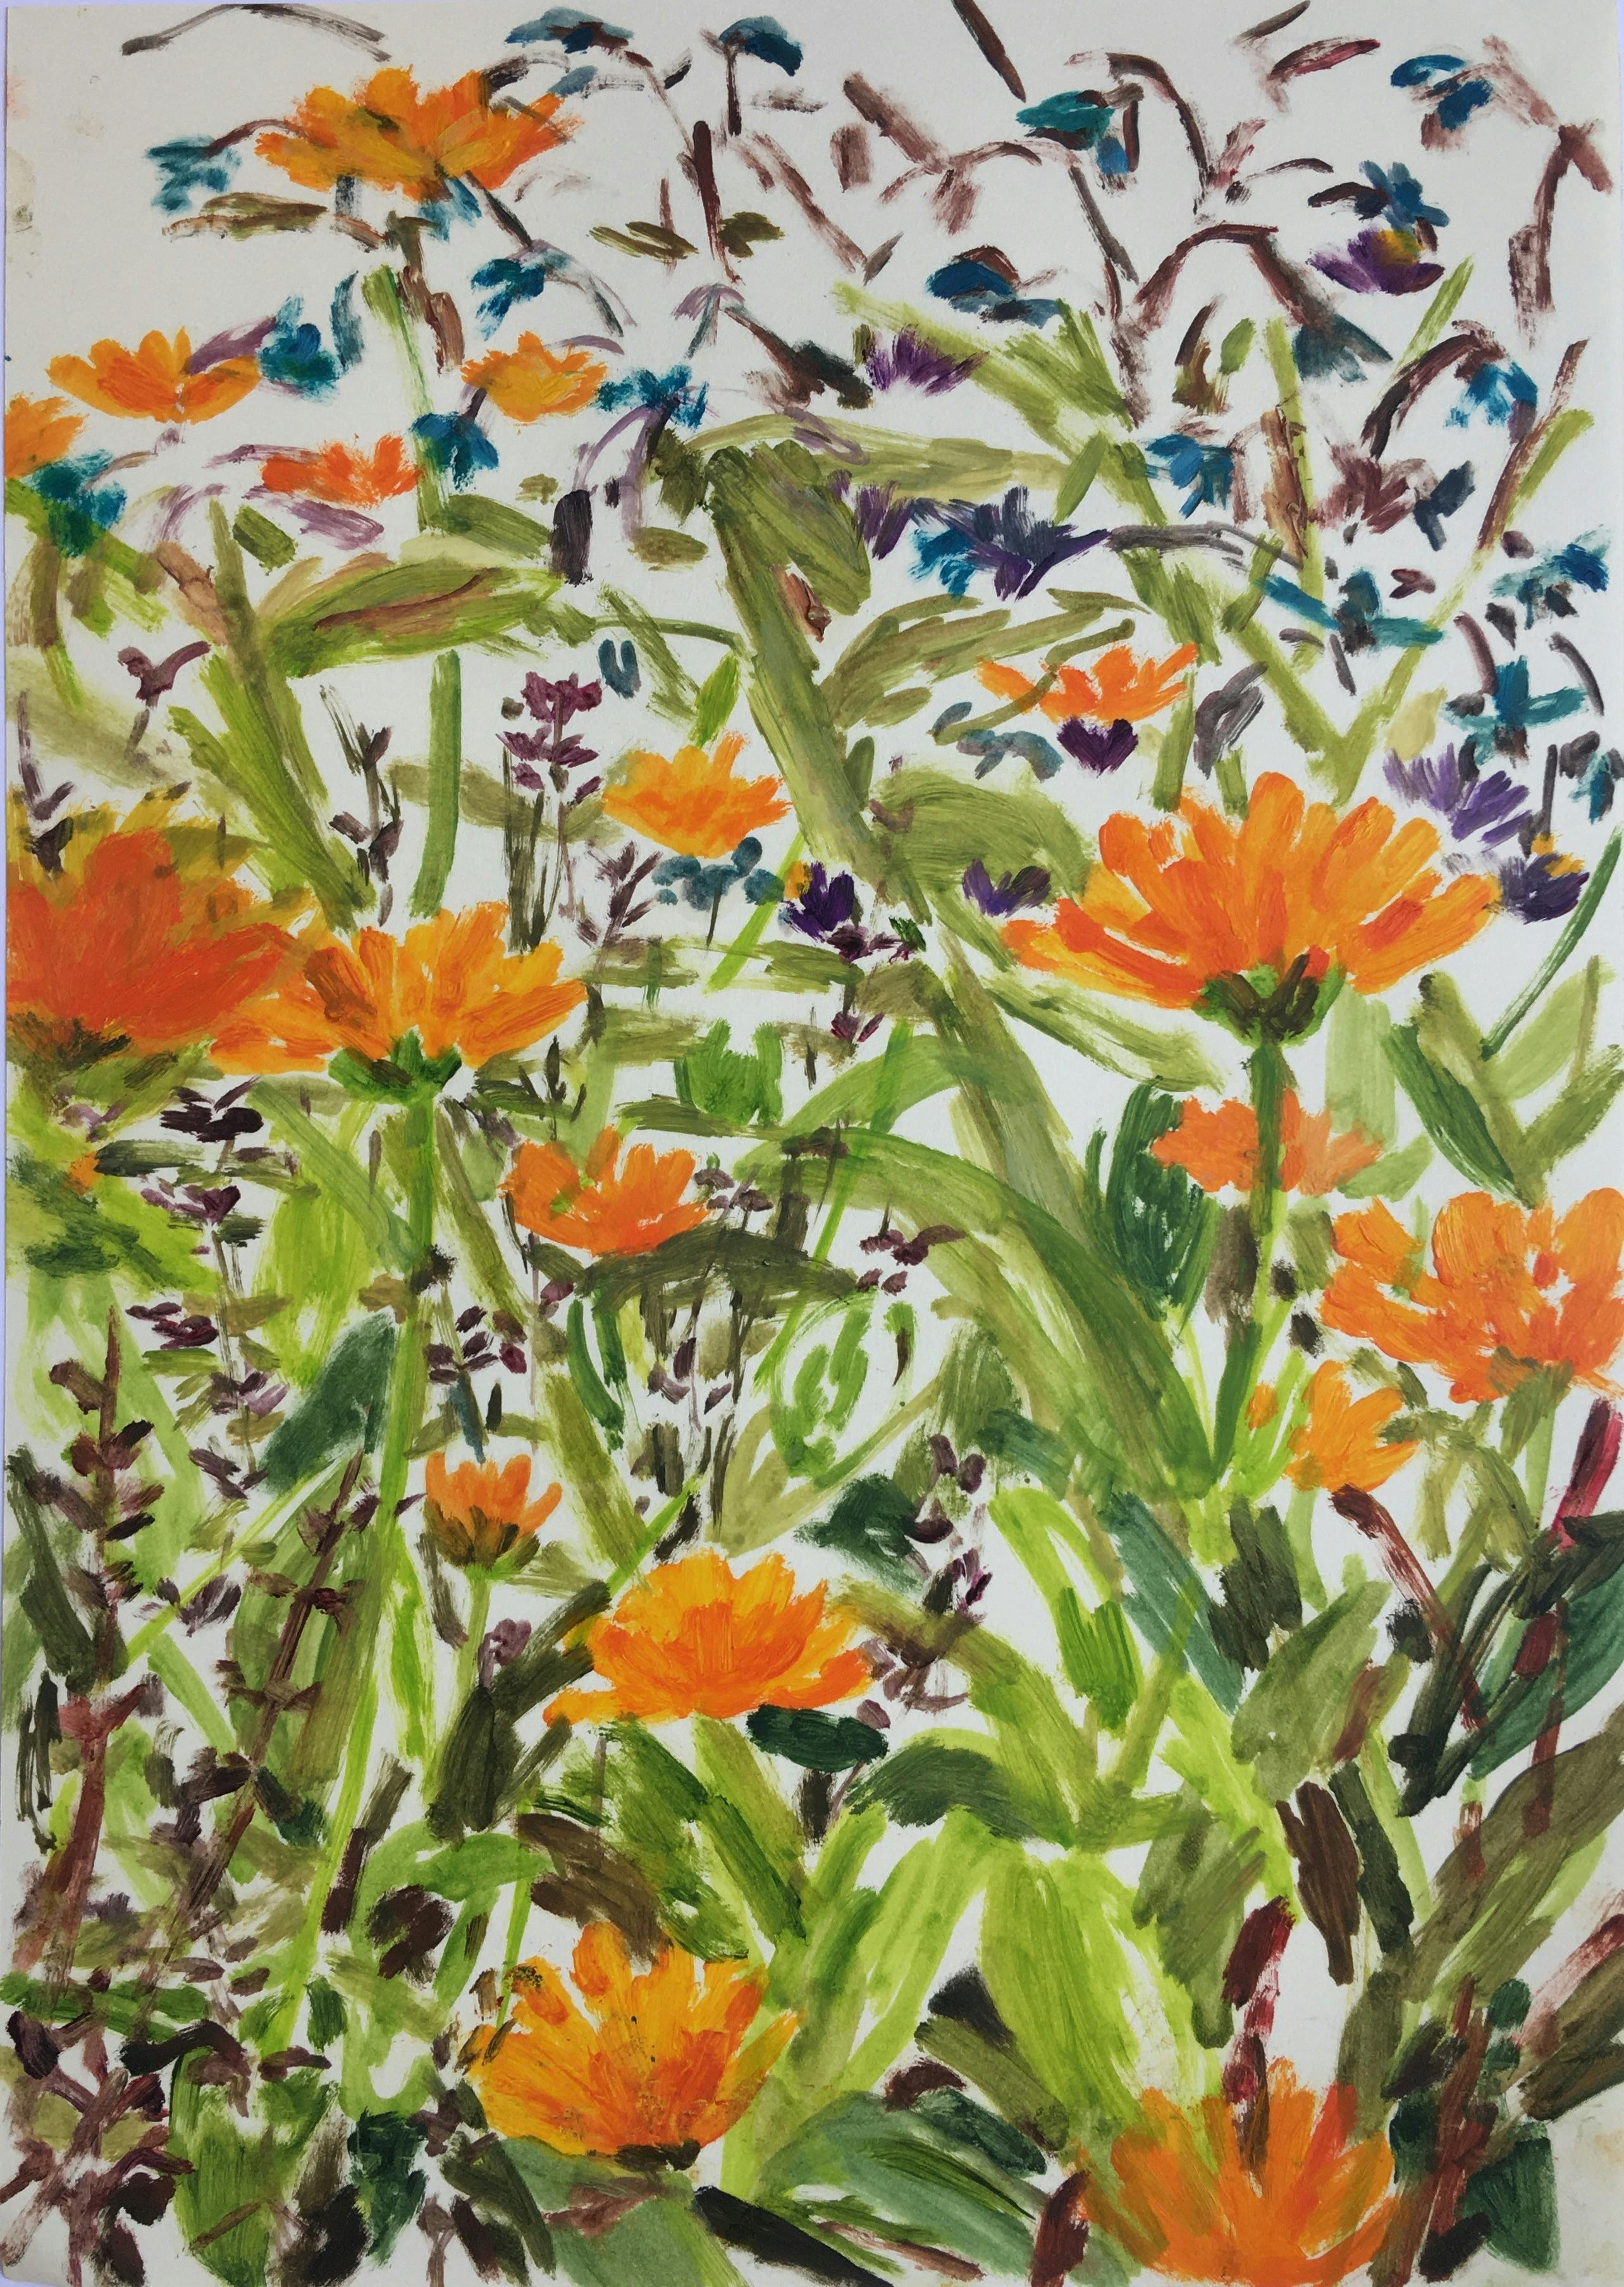 Marigolds and Borage, 2020. Oil on paper, 21 x 29.5cm